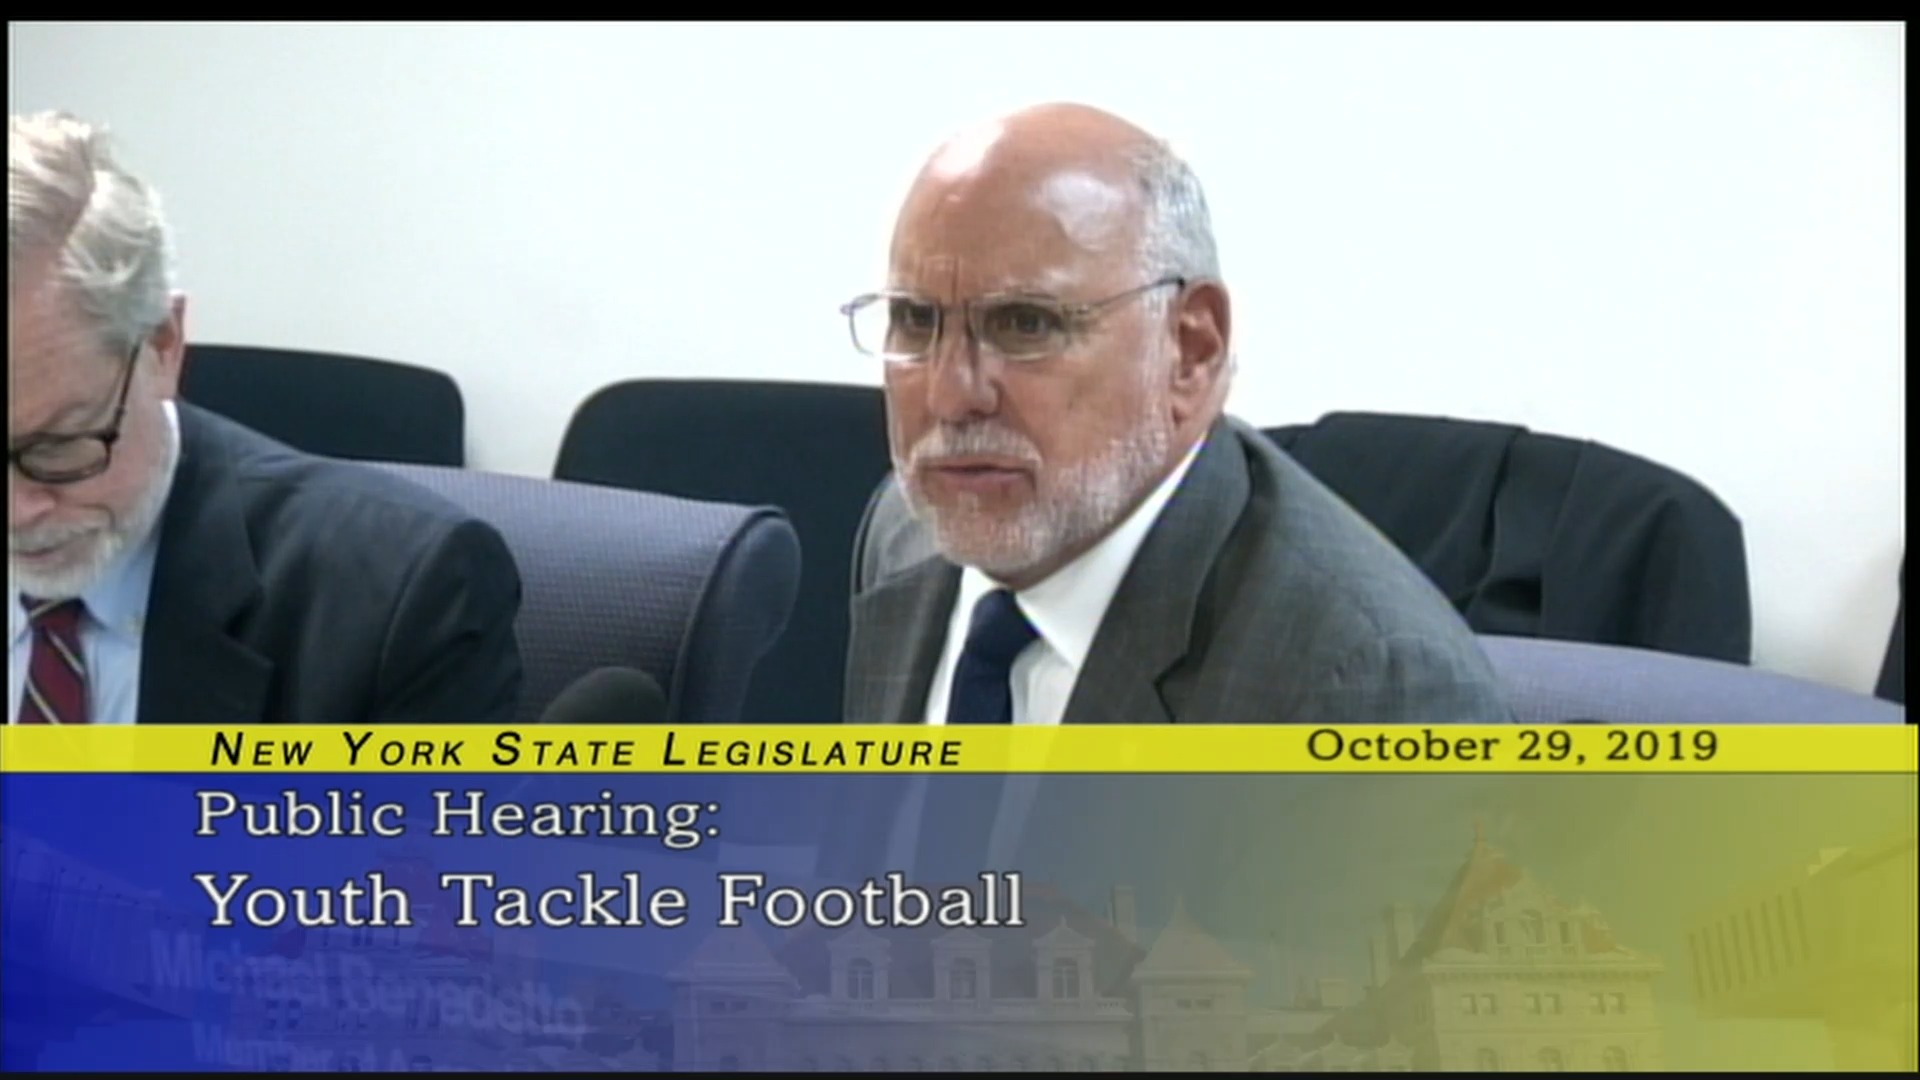 Public Hearing on Youth Tackle Football